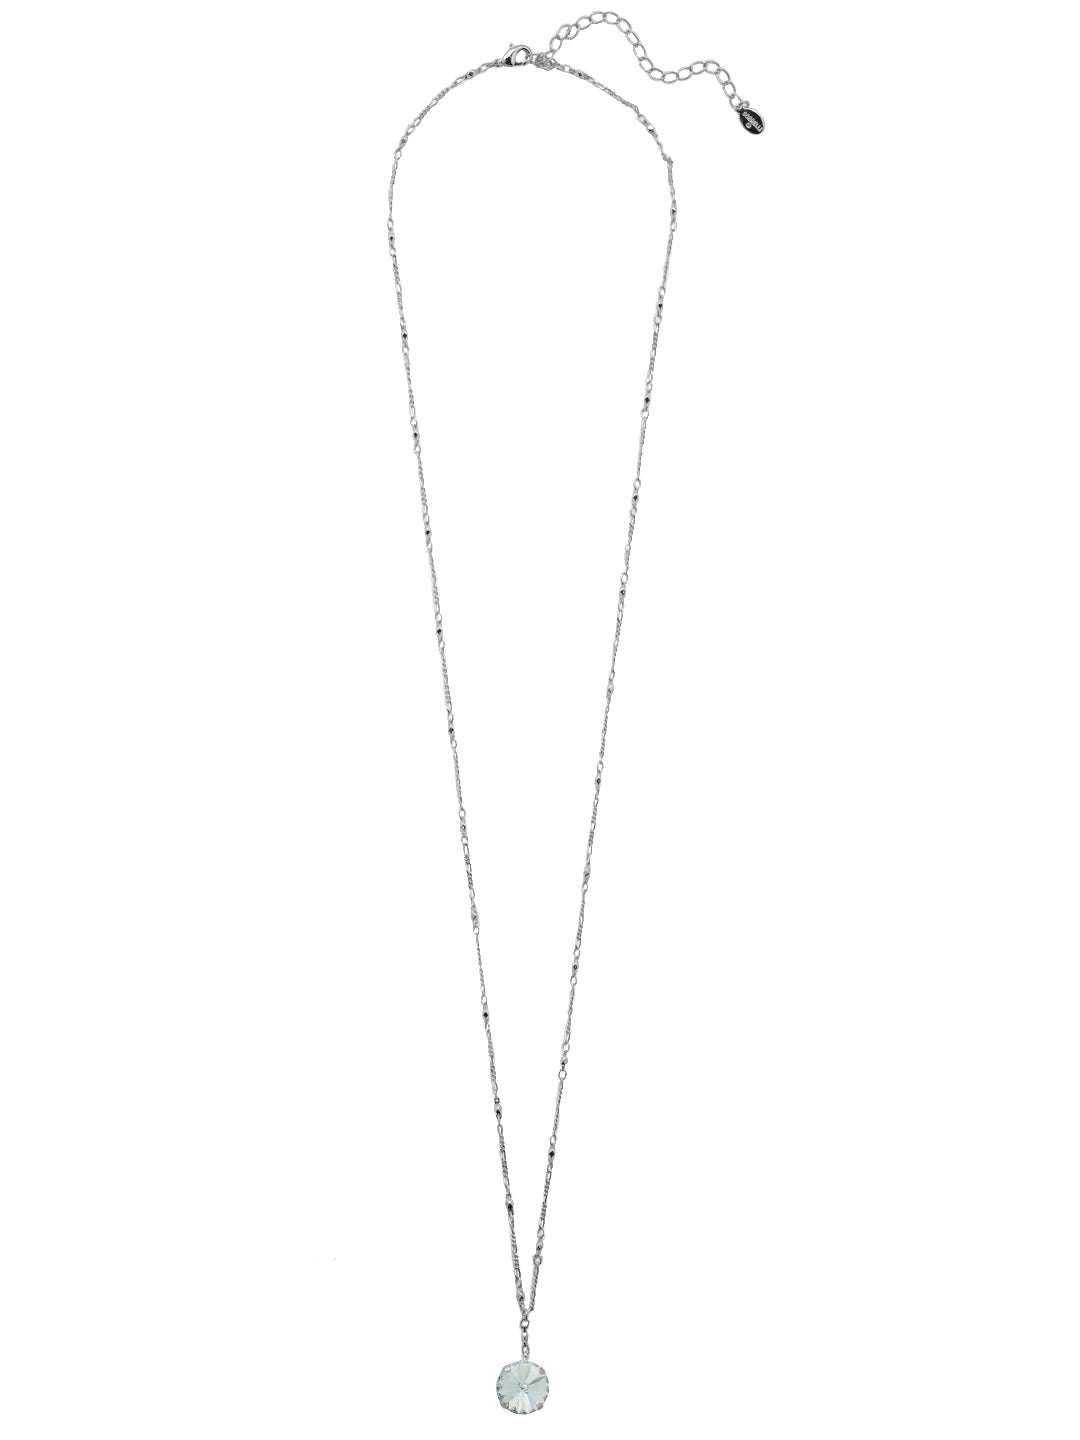 Nadine Long Pendant Necklace - 4NEZ16PDLA - <p>The Nadine Long Pendant Necklace features a single round cut crystal at the base of an adjustable long chain, secured with a lobster claw clasp. From Sorrelli's Light Azore collection in our Palladium finish.</p>